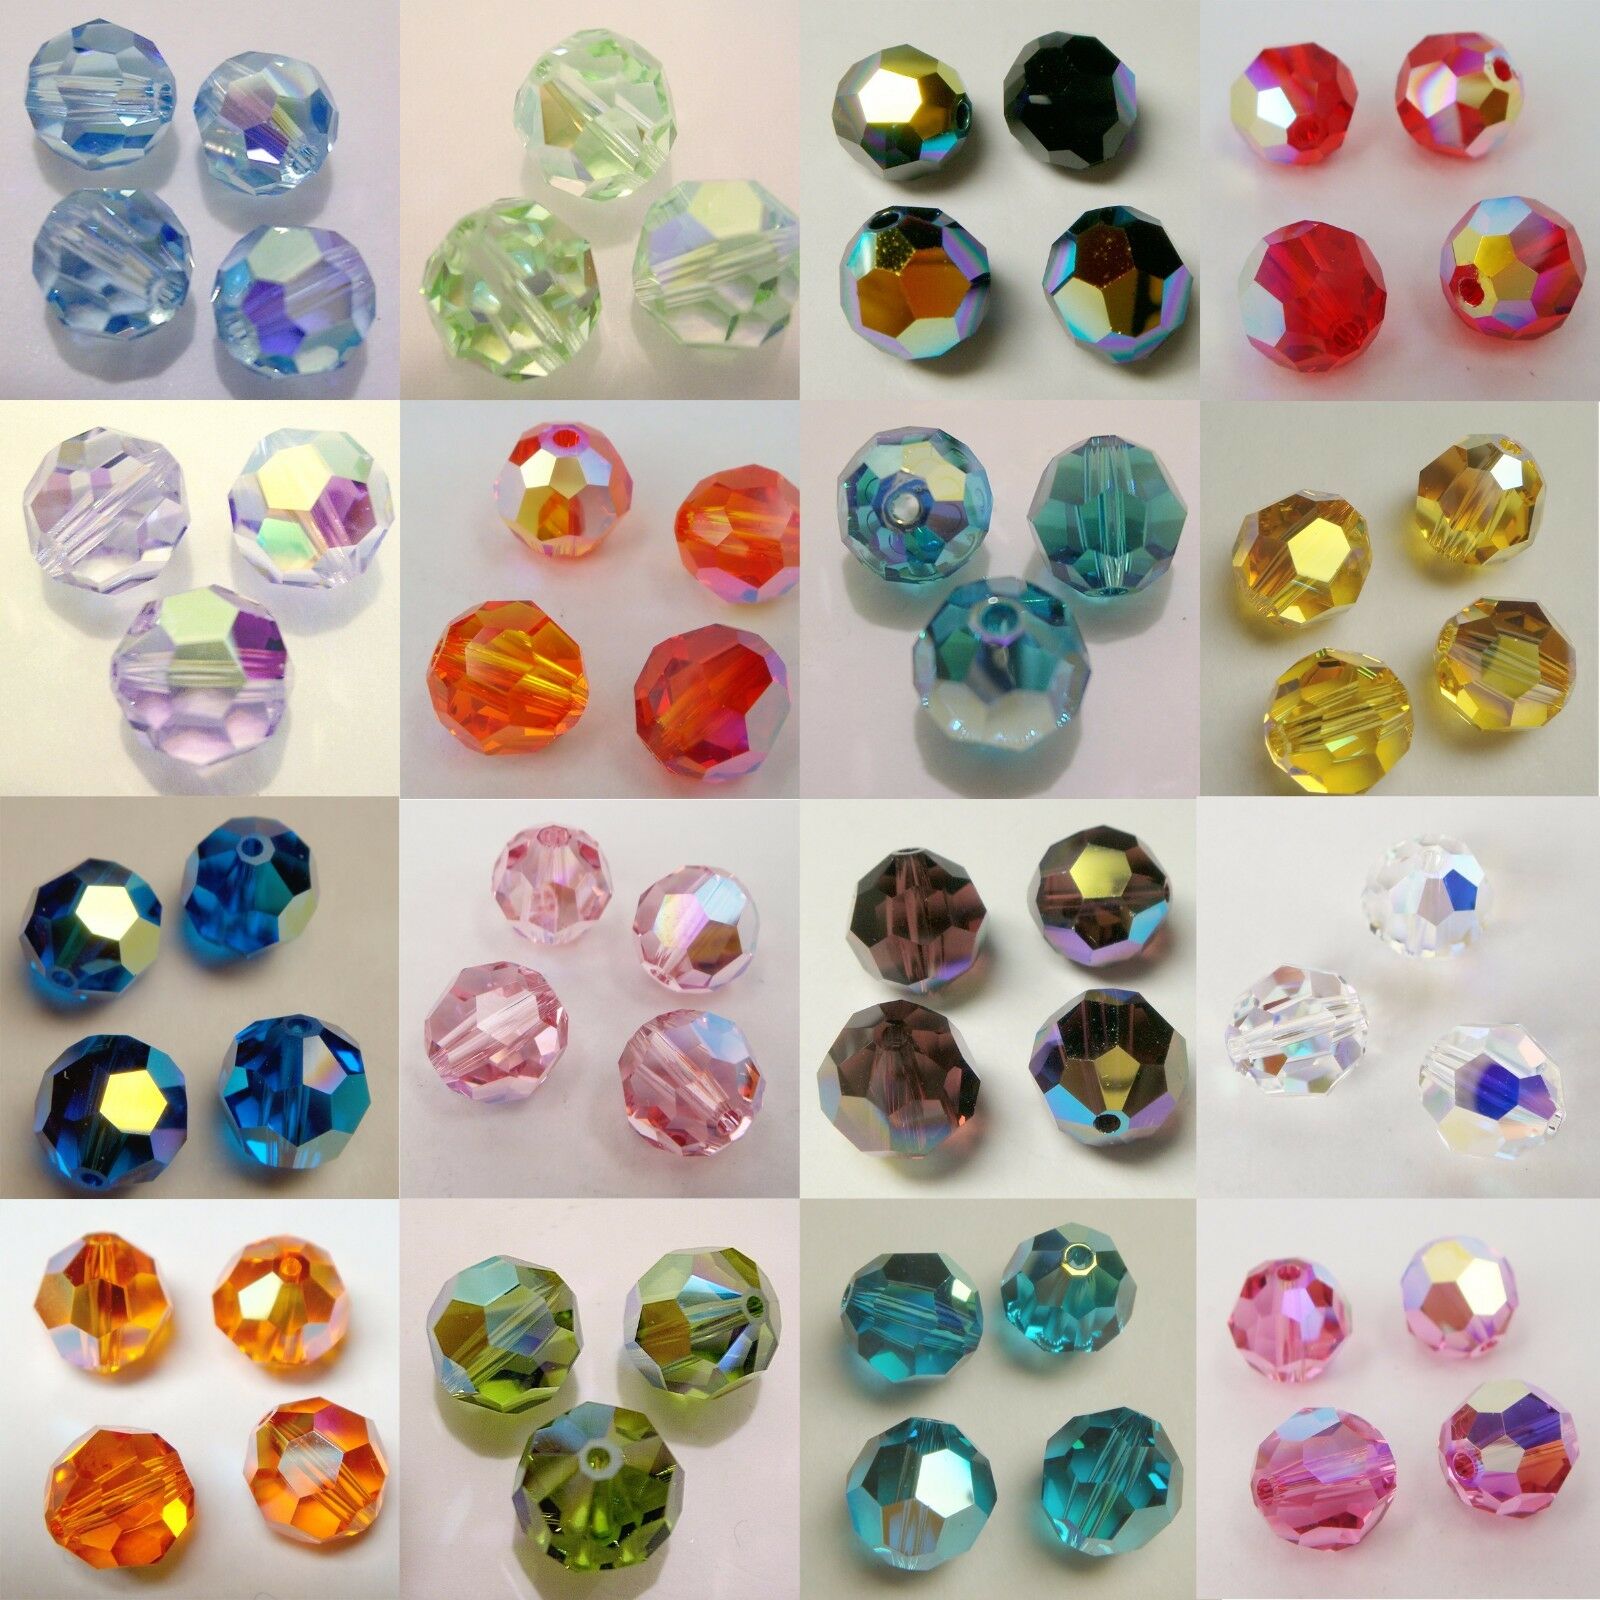 Genuine Swarovski Crystal 5000 6mm Faceted Round Bead Ab / Coating ~ Many Color